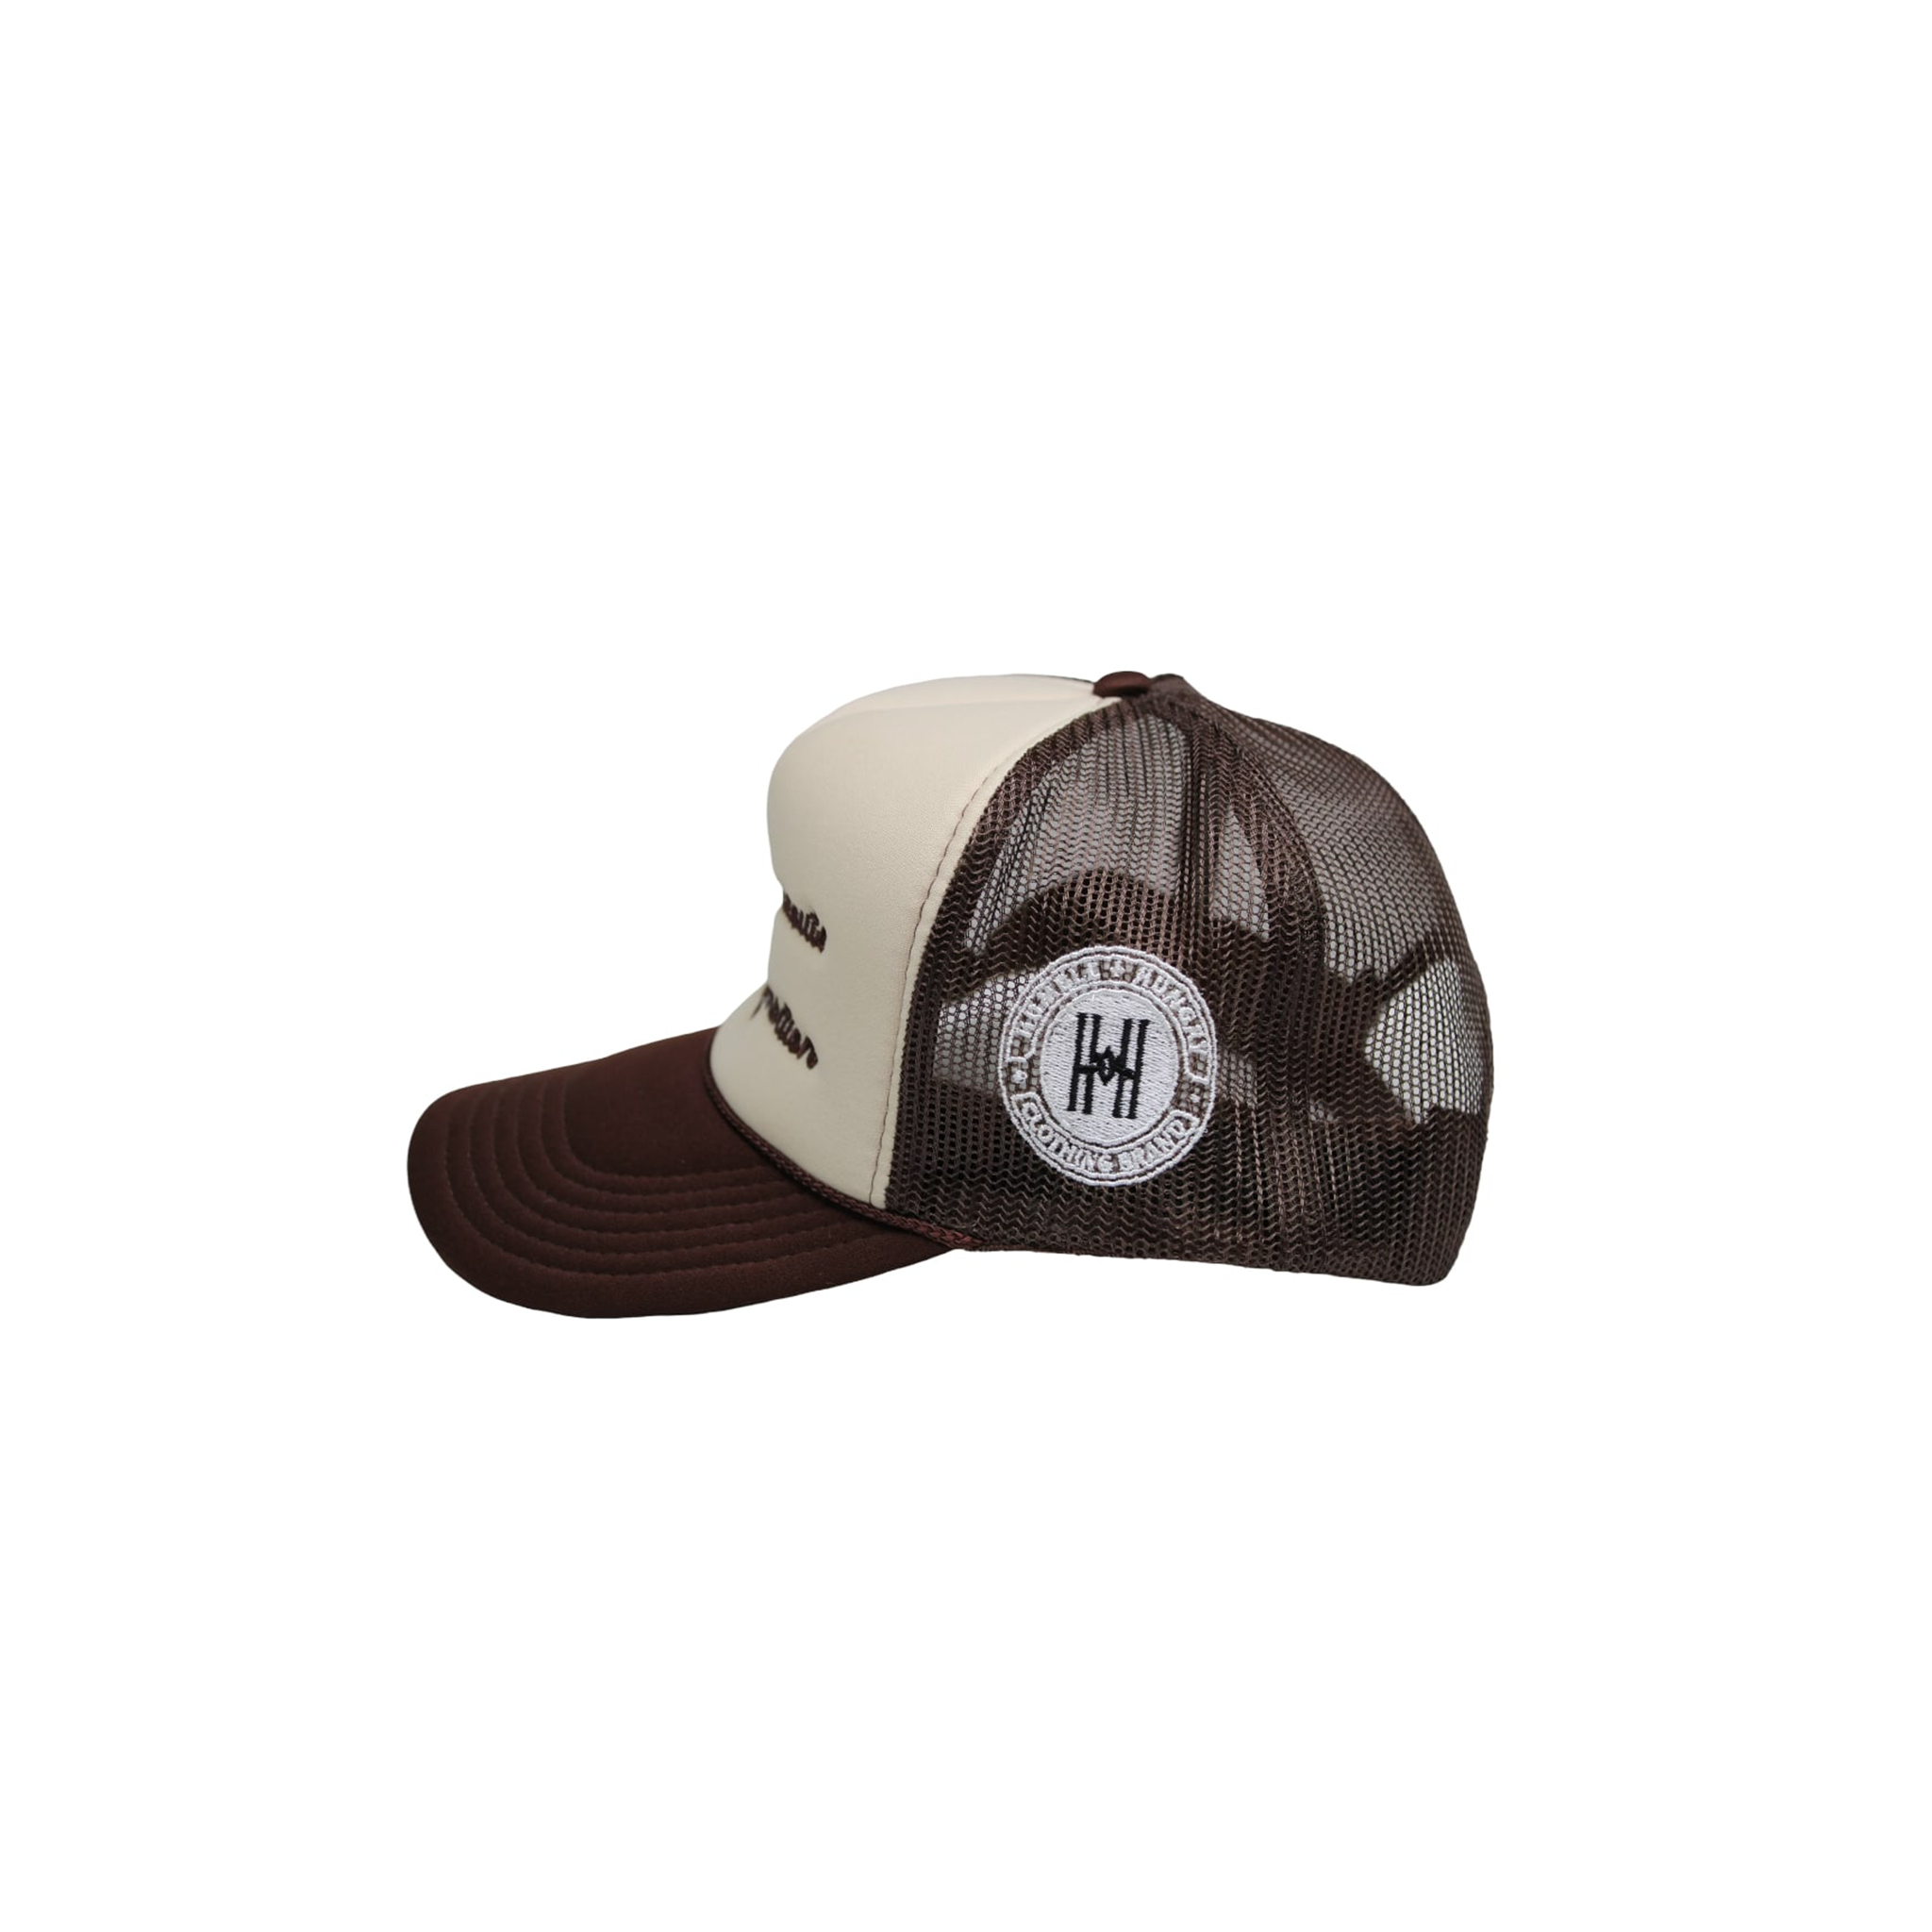 'All Ambition' Trucker Hat in Brown